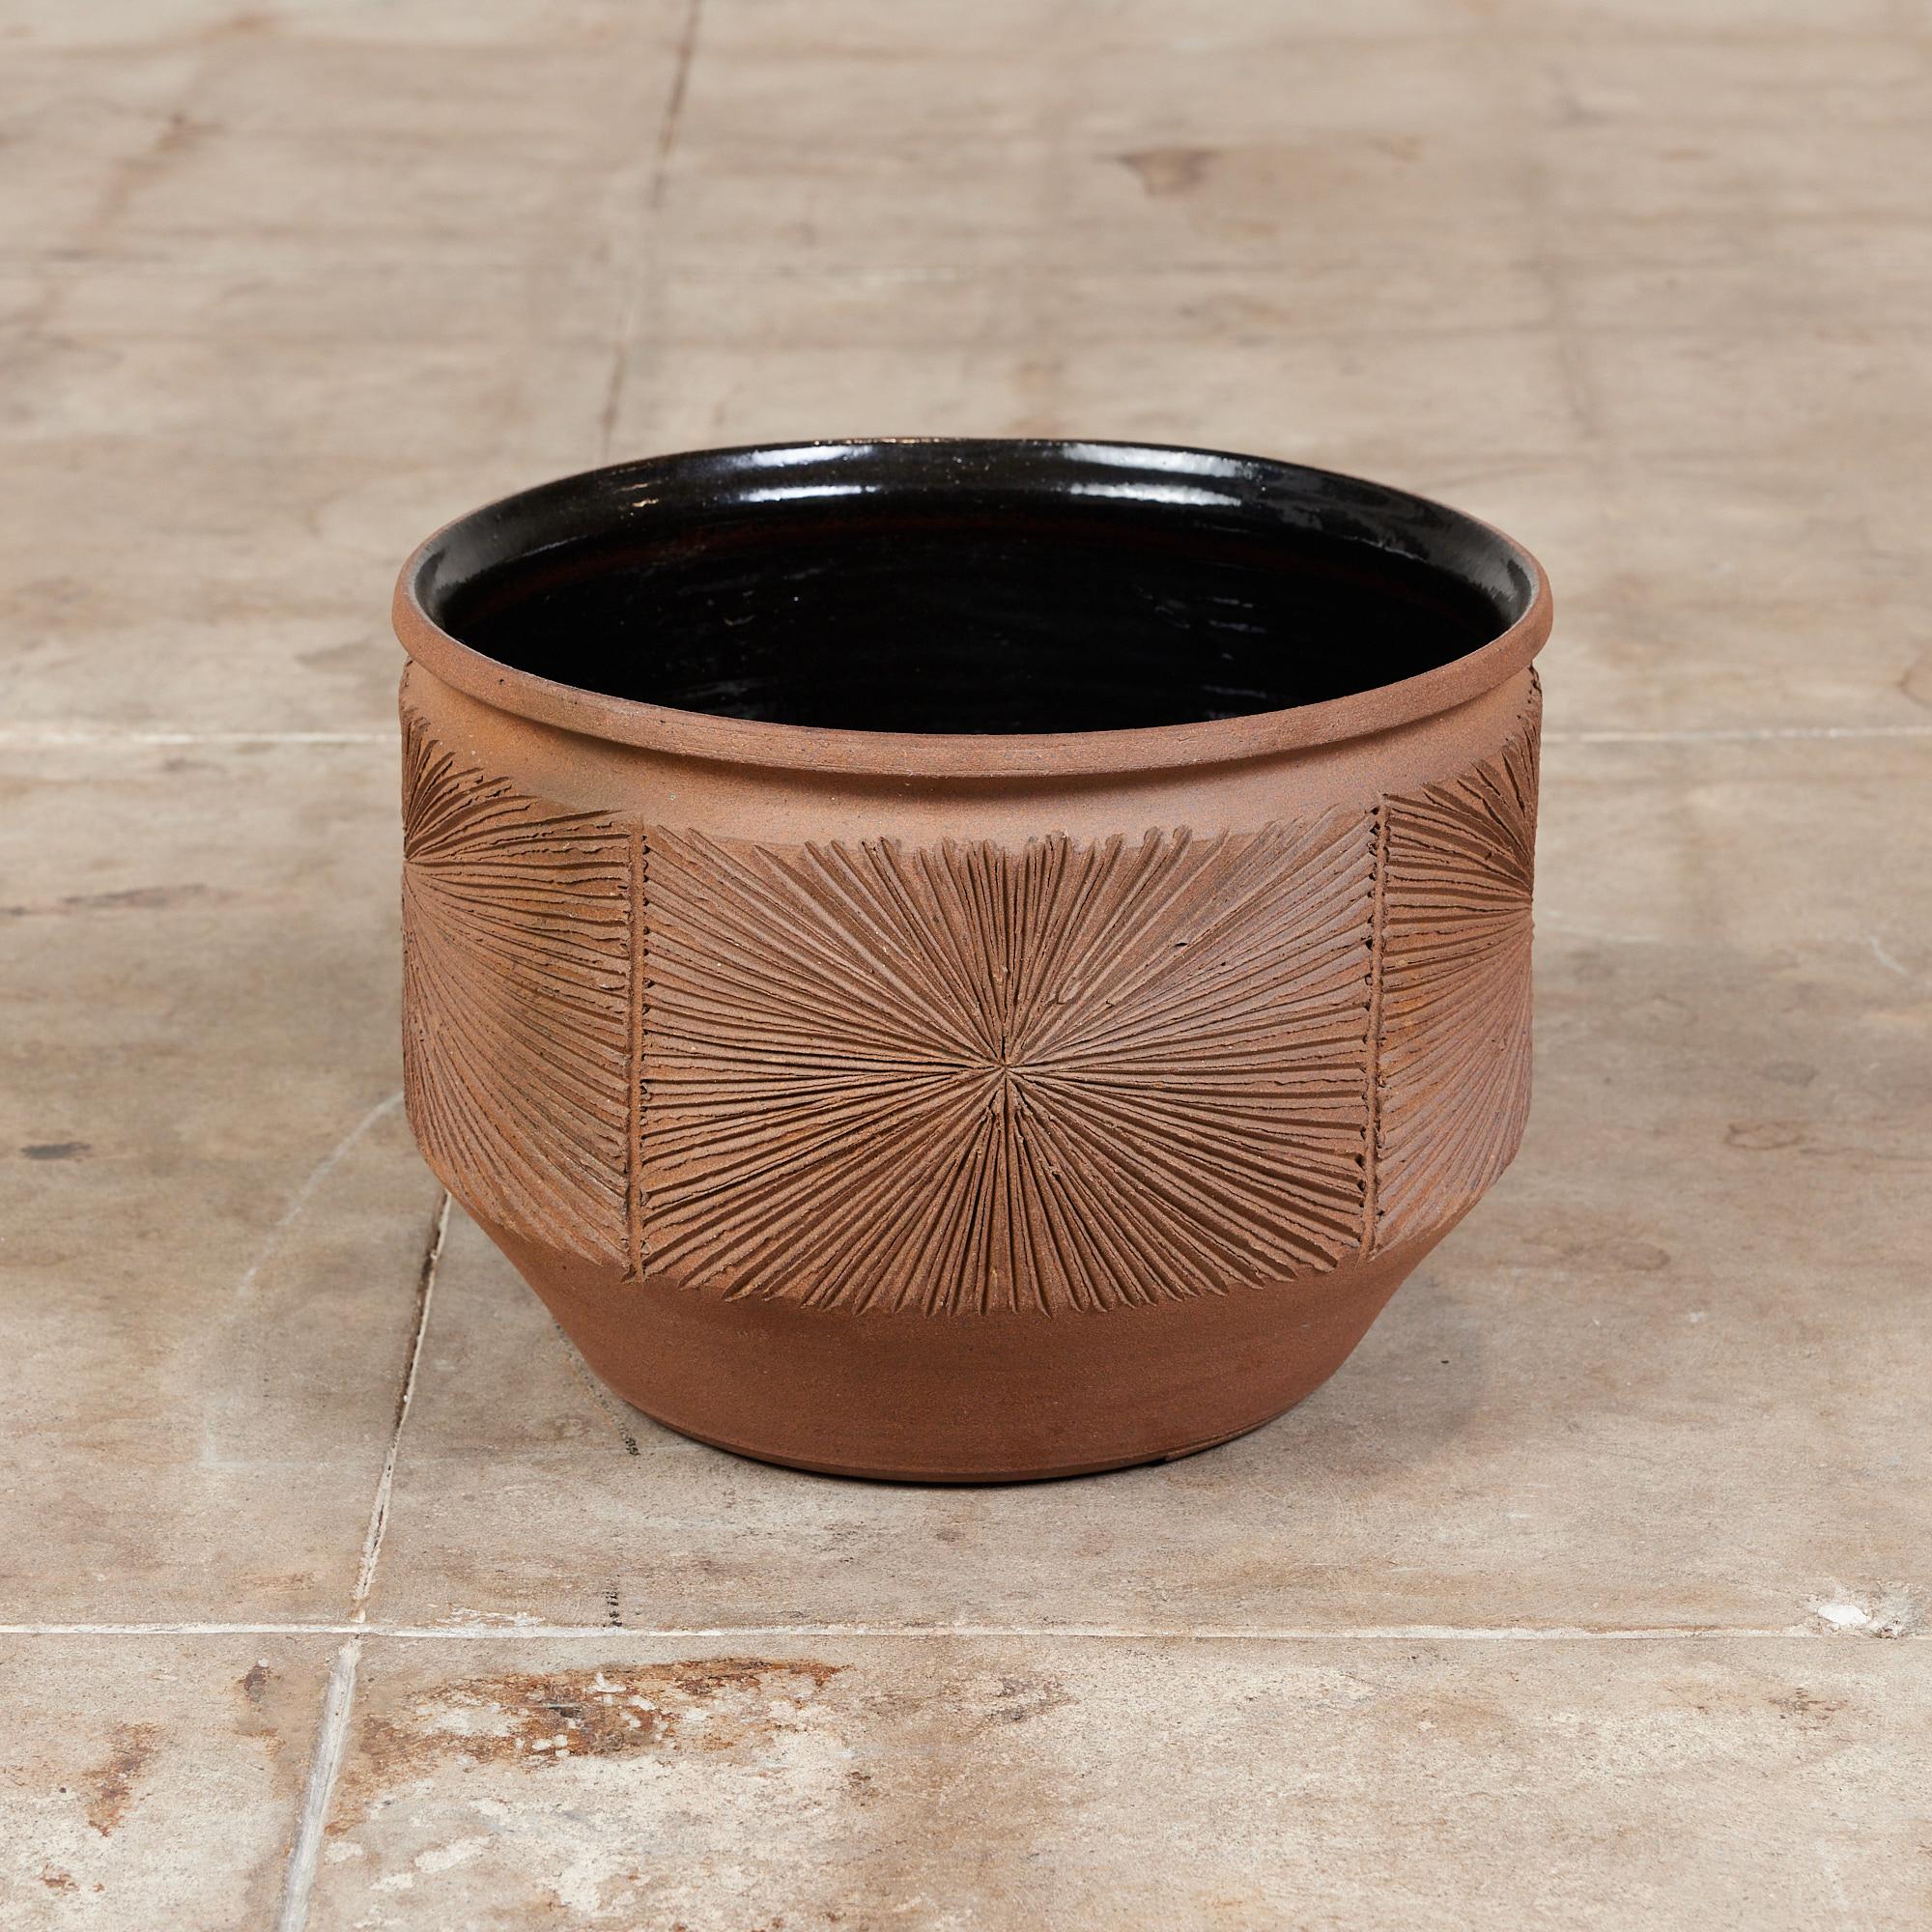 Hand thrown stoneware planter from Earthgender, David Cressey and Robert Maxwell’s early 1970s project. This 16” diameter example is incised in the “Sunburst” design a pattern of lines radiating from a central point. The interior of the planter has